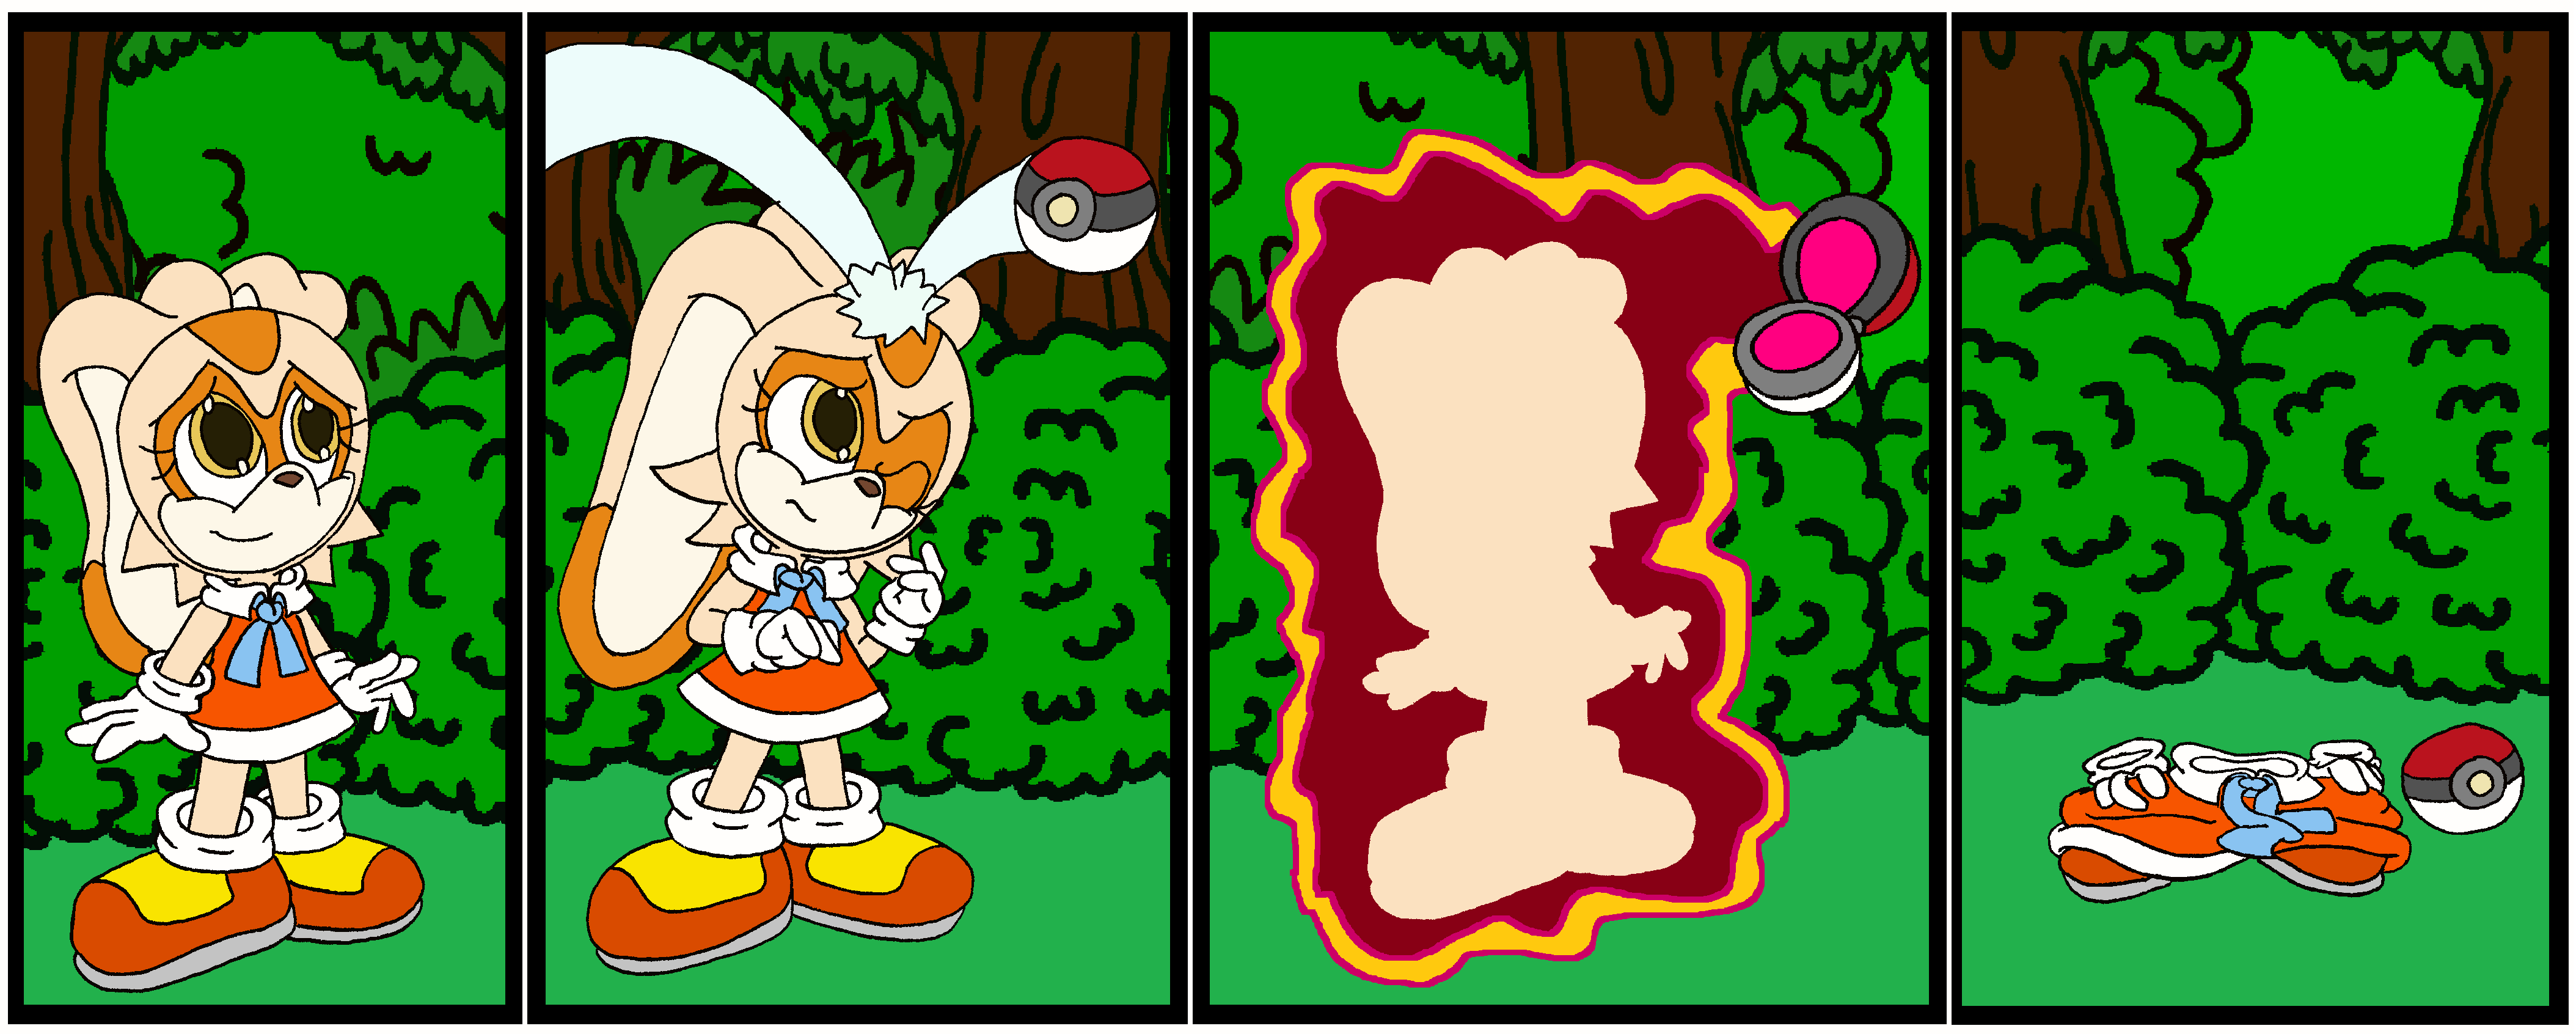 catching Cream by DARKZADAR < Submission | Inkbunny, the Furry Art Community